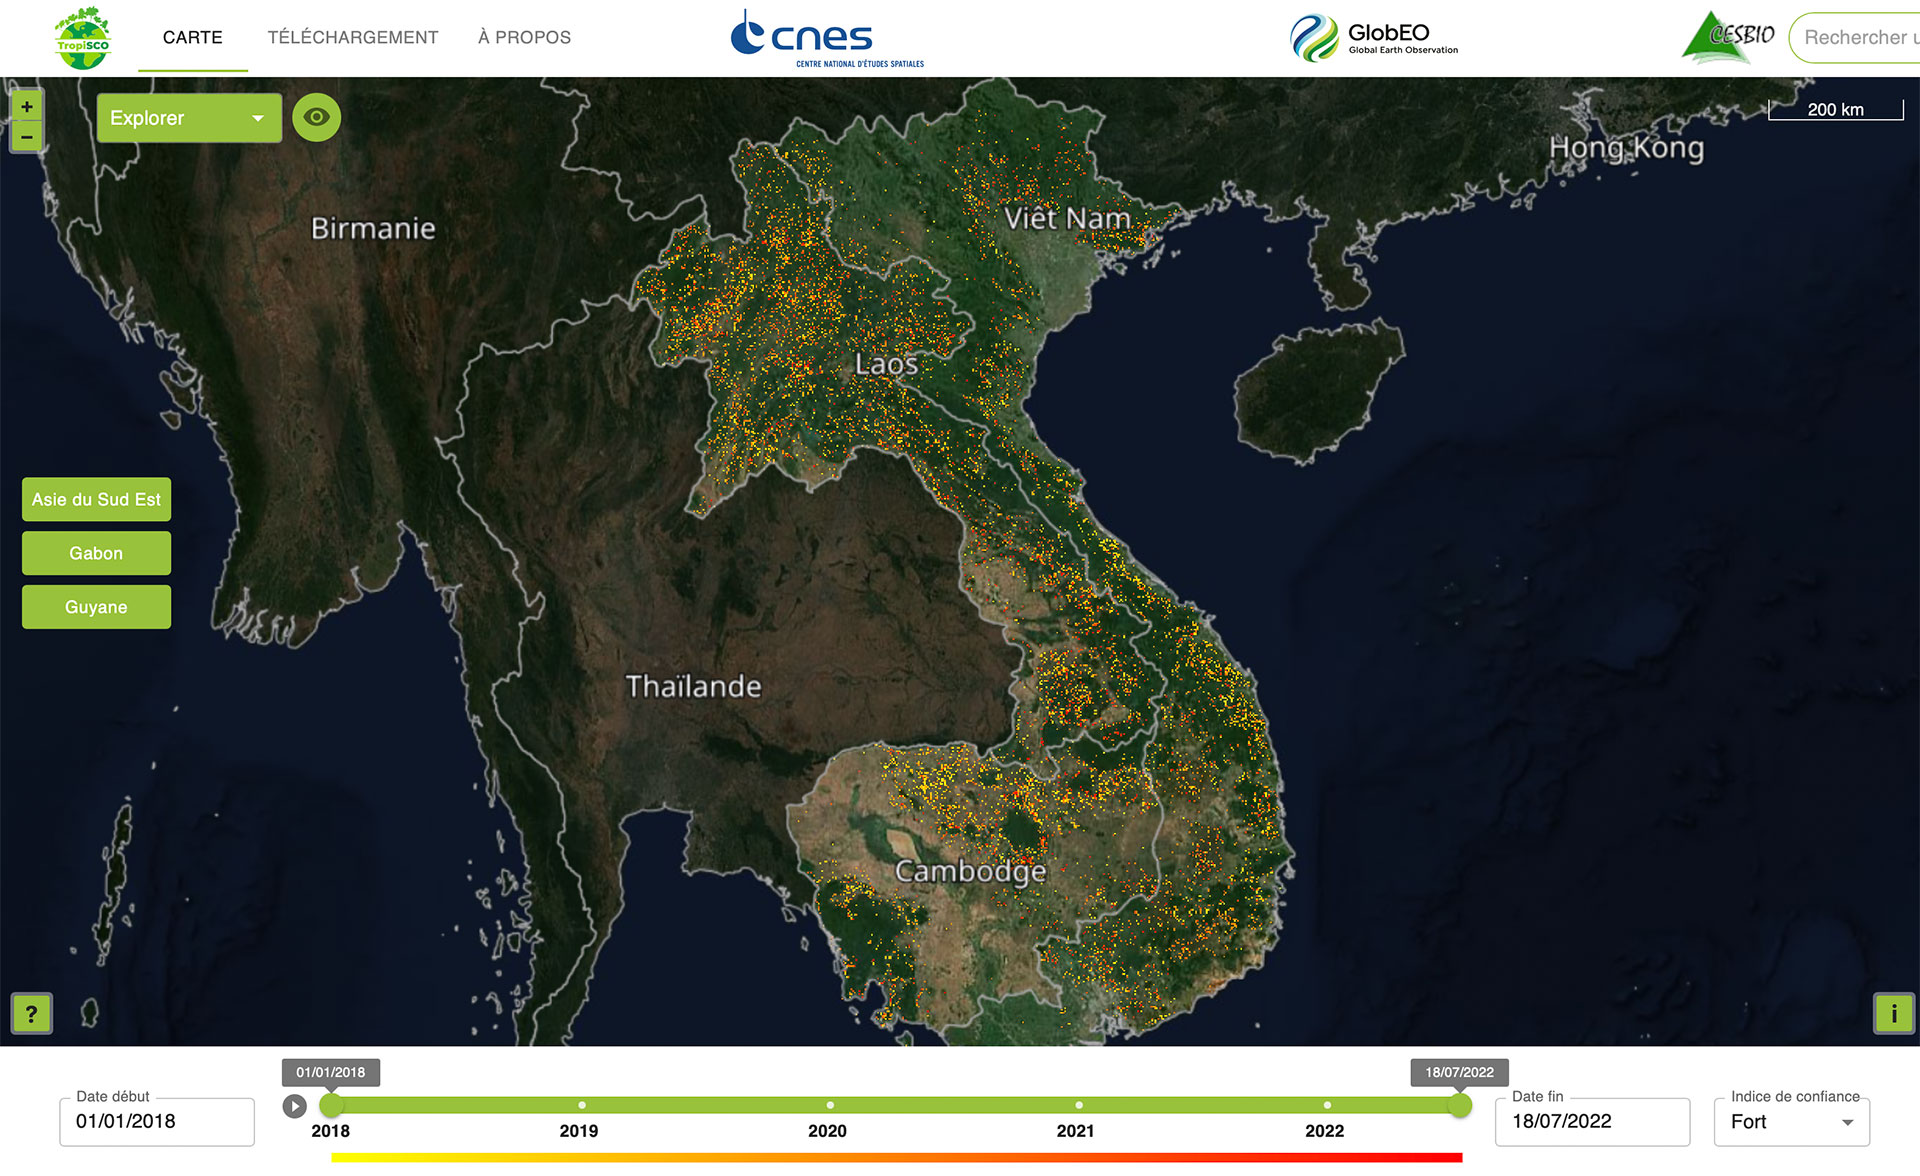 Of the seven project sites, Southeast Asia shows the greatest forest loss since 2018.